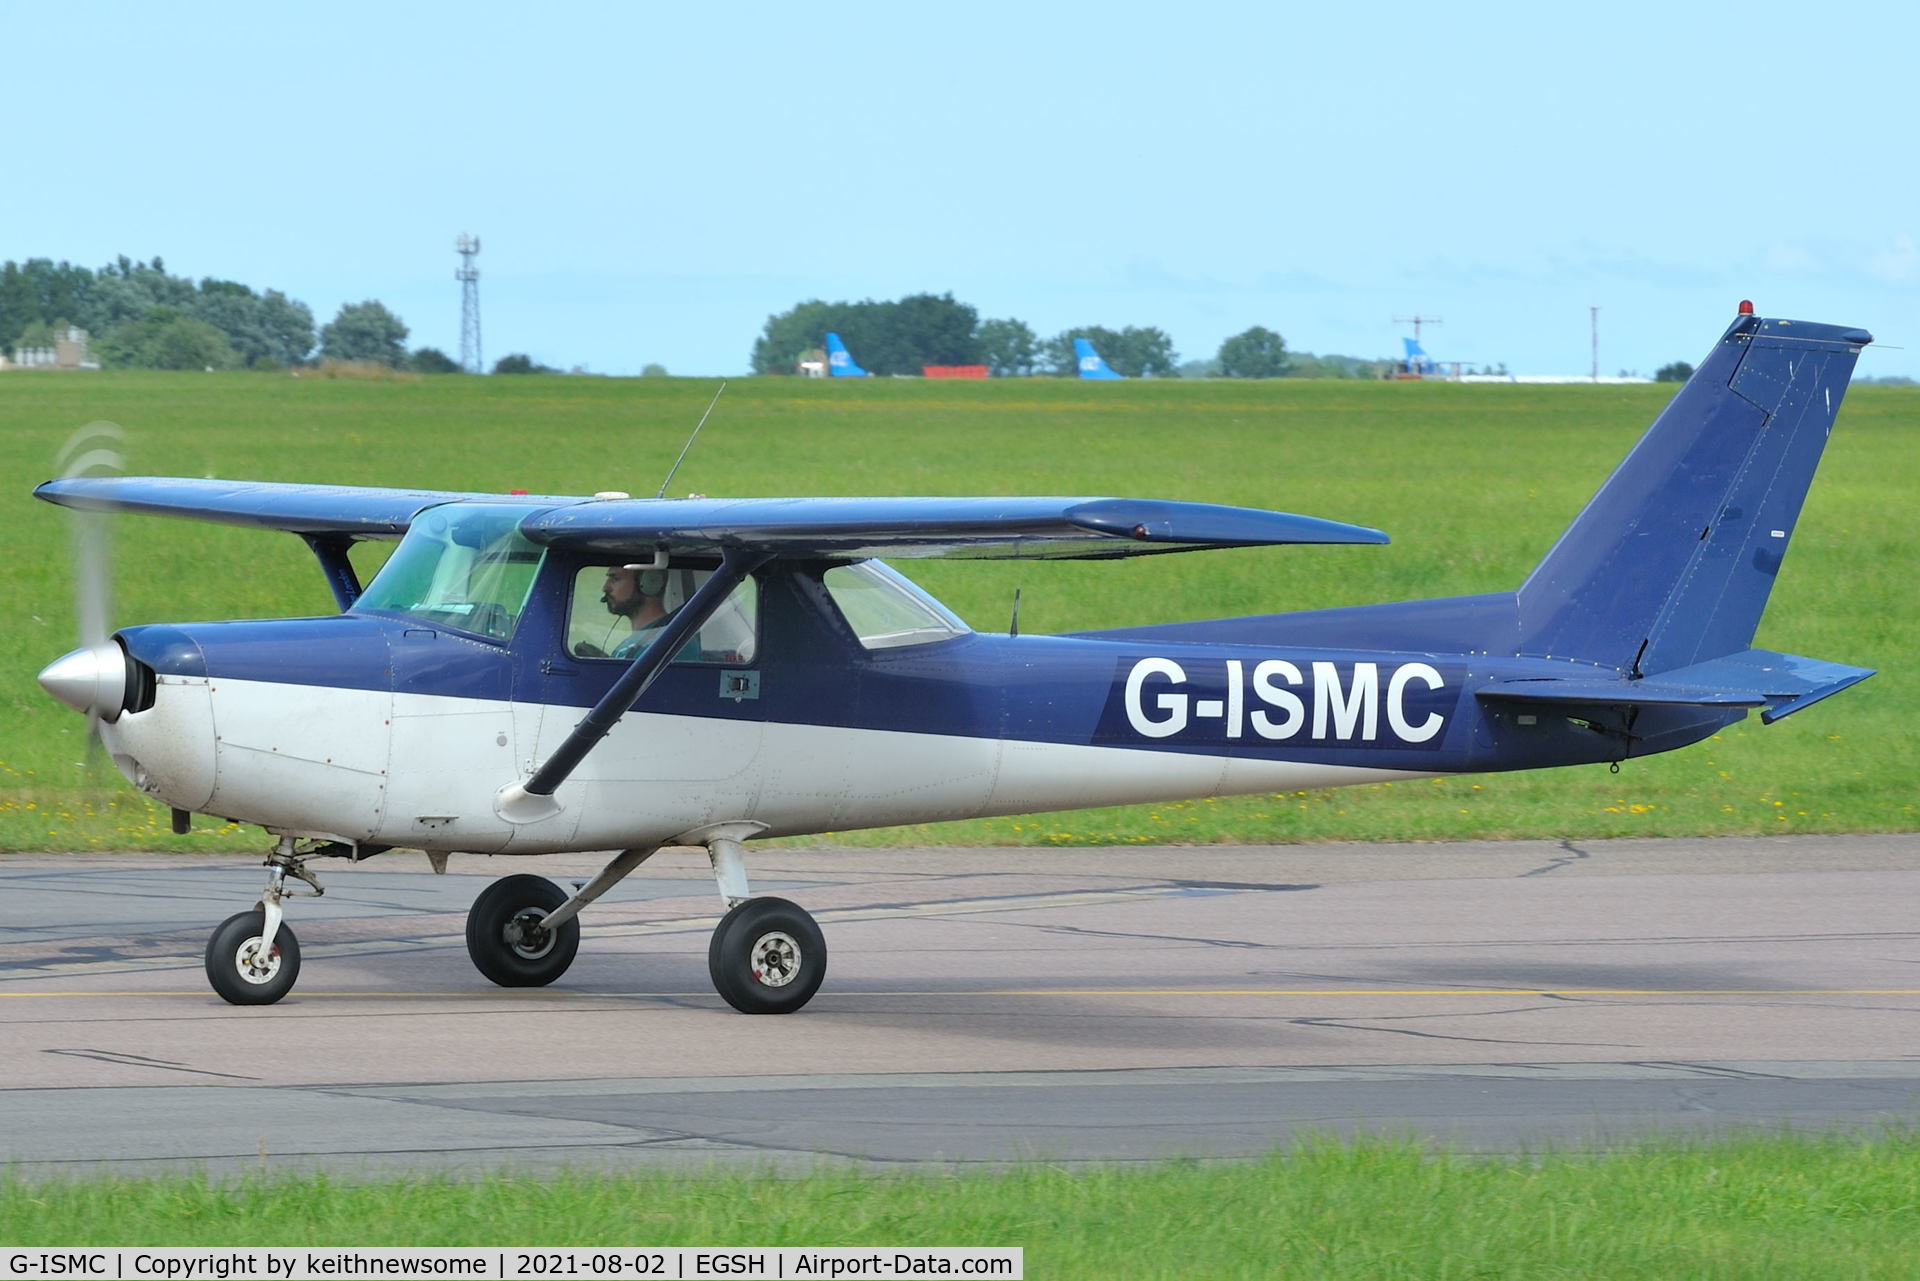 G-ISMC, 1978 Reims F152 C/N 15201468, Arriving at Norwich from Stapleford Tawney.